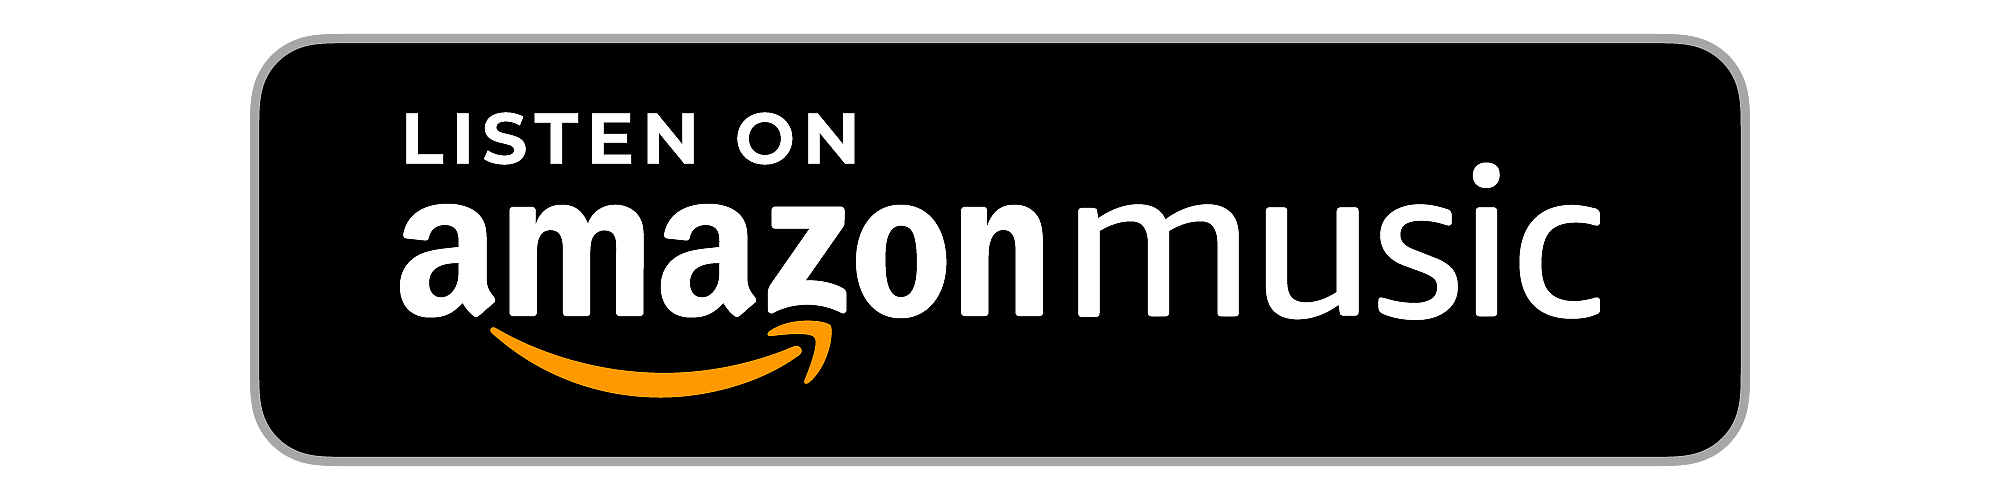 listen-on-amazon-button.png